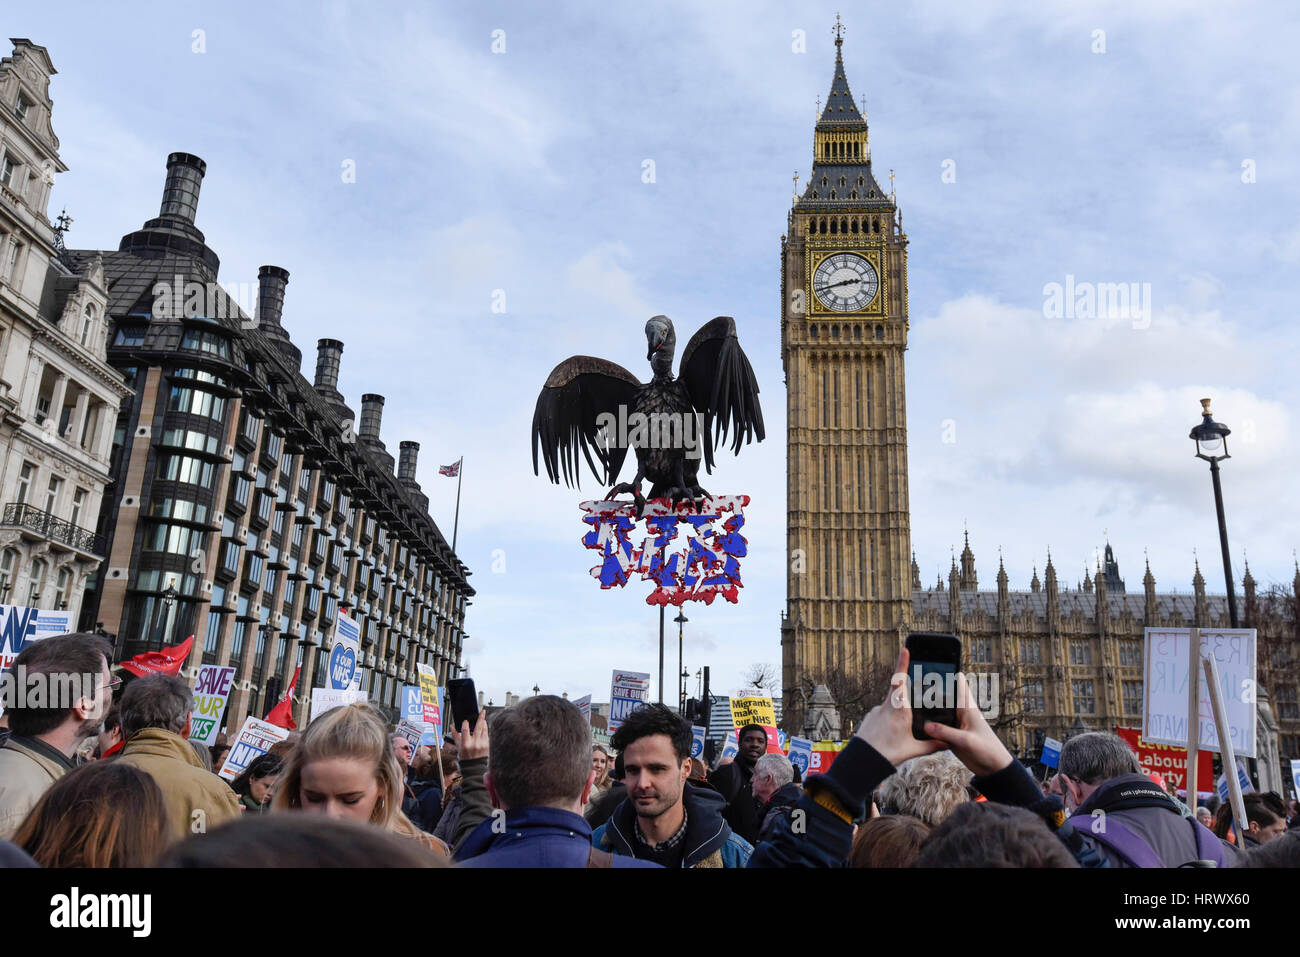 London, UK.  4 March 2017.  Thousands take part in a 'Save the NHS' rally, many carrying placards and signs.  Demonstrators protested against funding cuts, marching from Tavistock Square to Parliament Square.   Credit: Stephen Chung / Alamy Live News Stock Photo